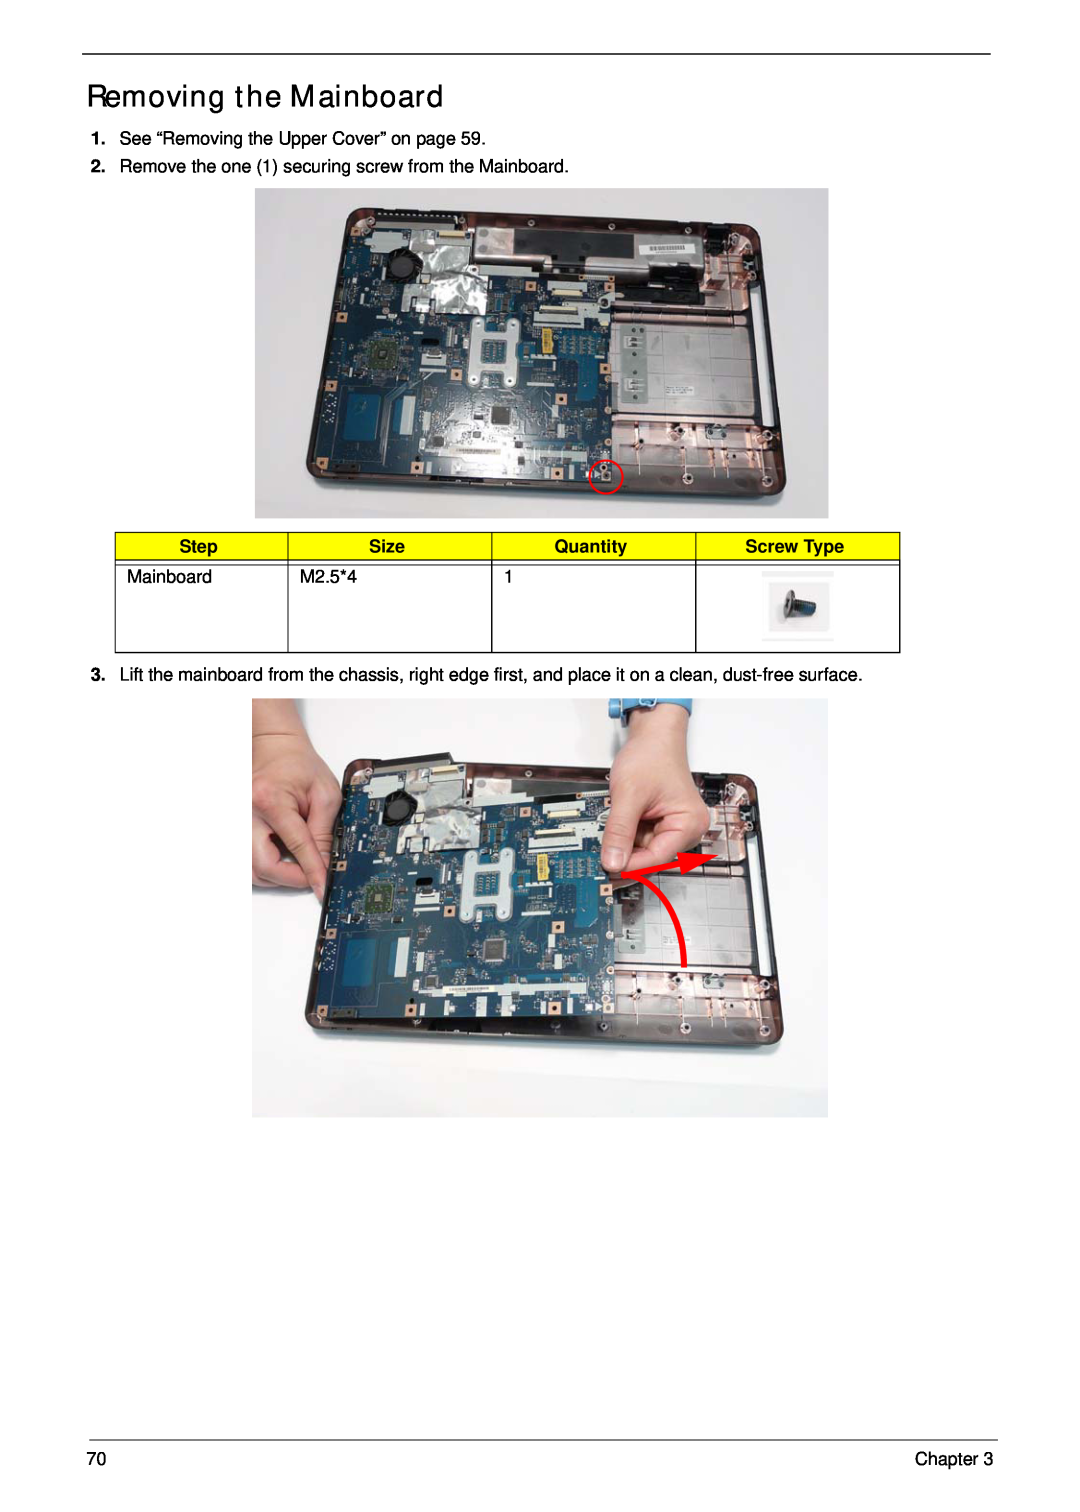 Acer 5532 manual Removing the Mainboard, Step, Size, Quantity, Screw Type, M2.5*4, Chapter 